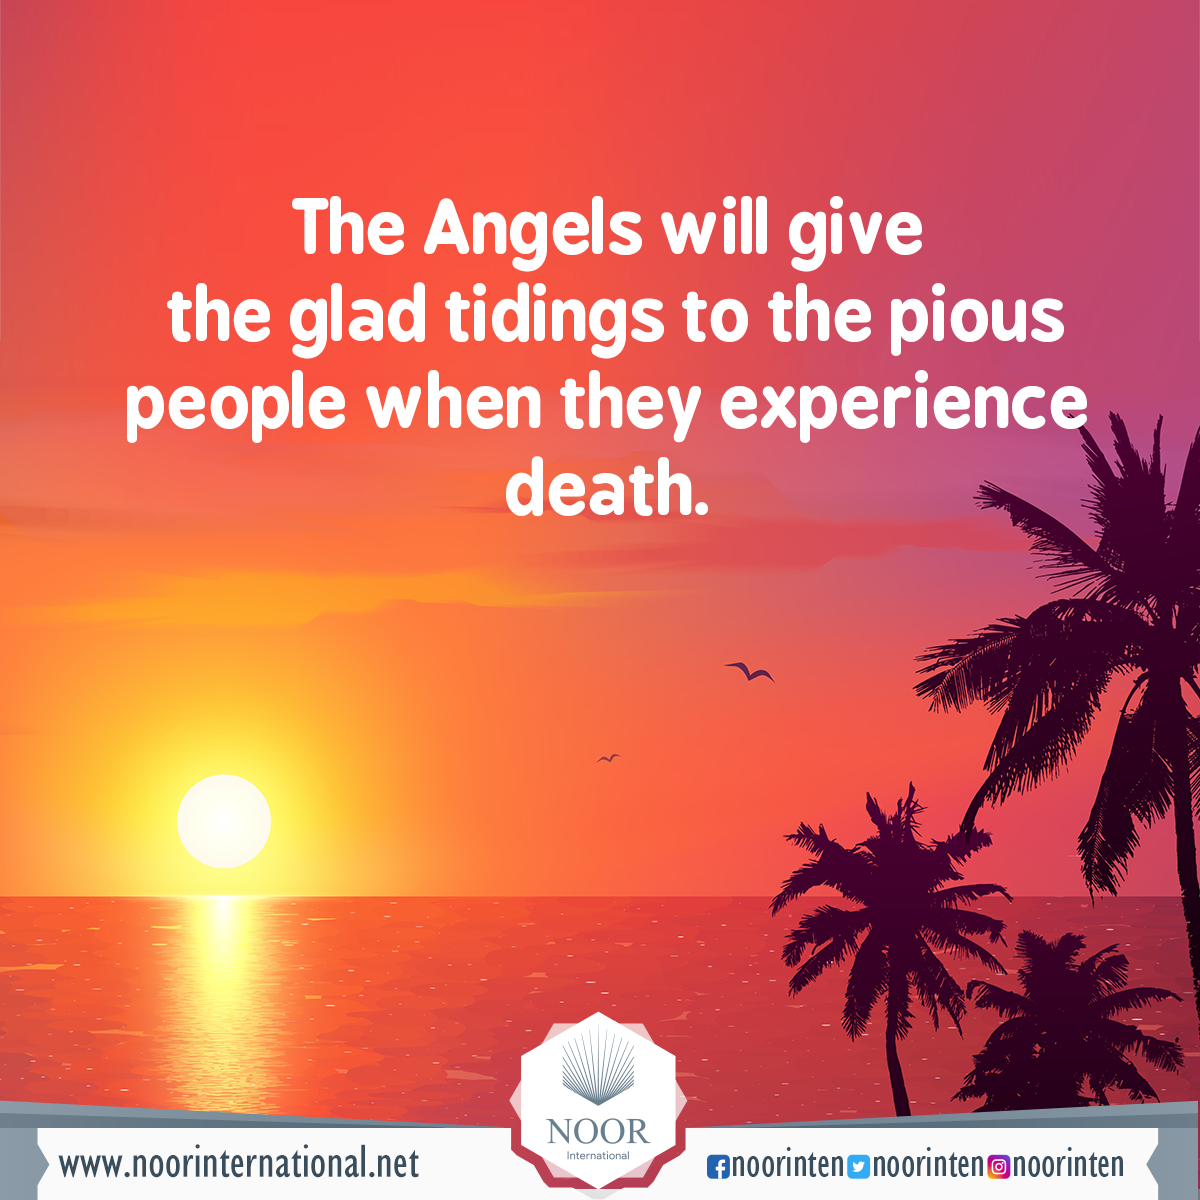 The Angels will give the glad tidings to the pious people when they experience death.